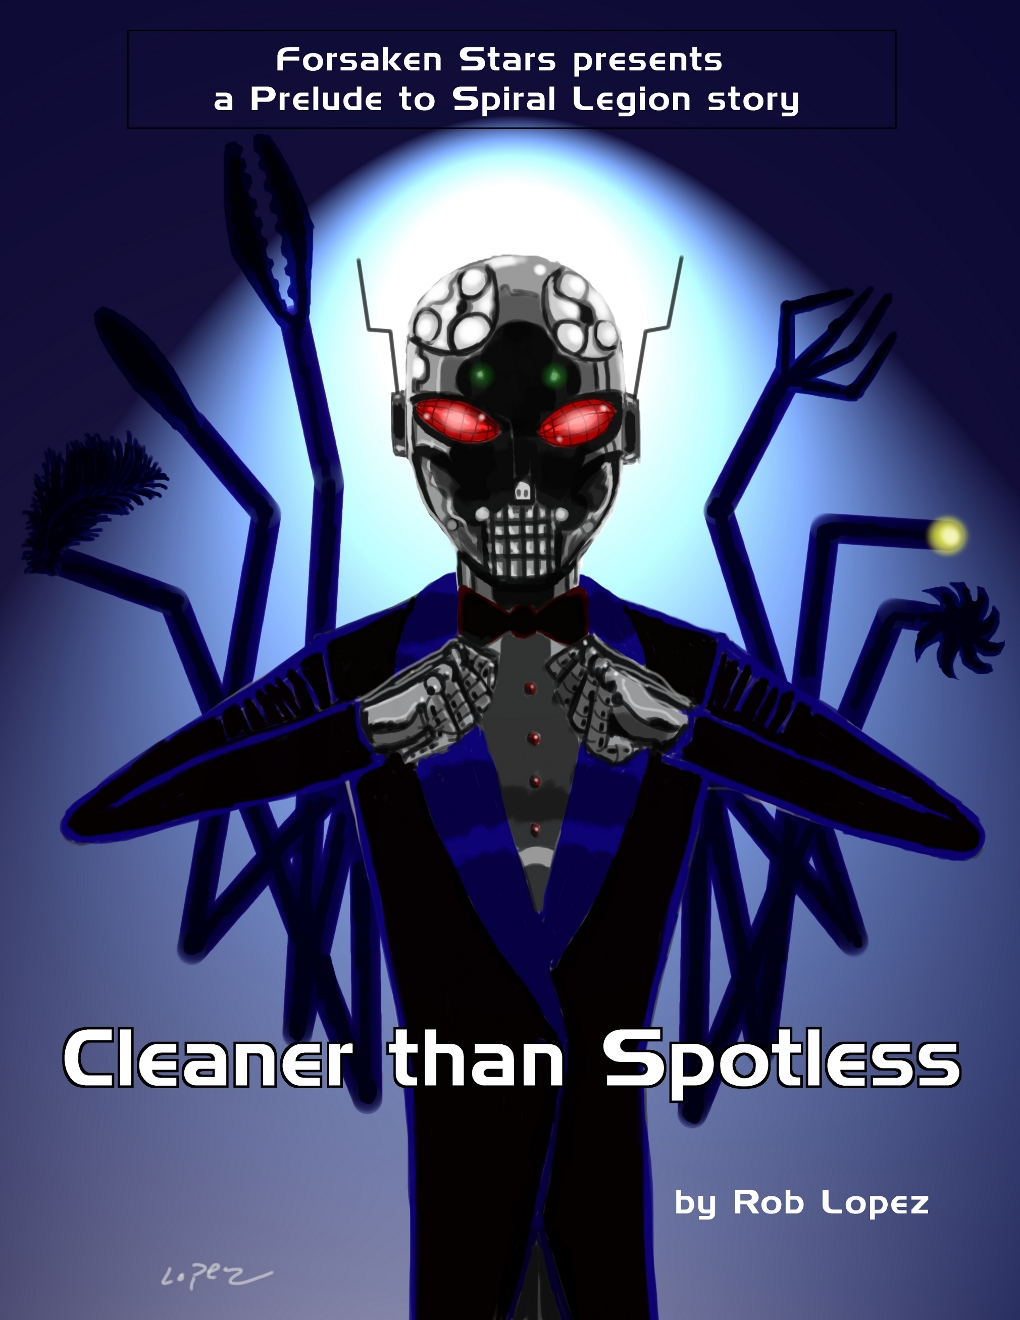 A Prelude to Spiral Legion Story: Cleaner than Spotless